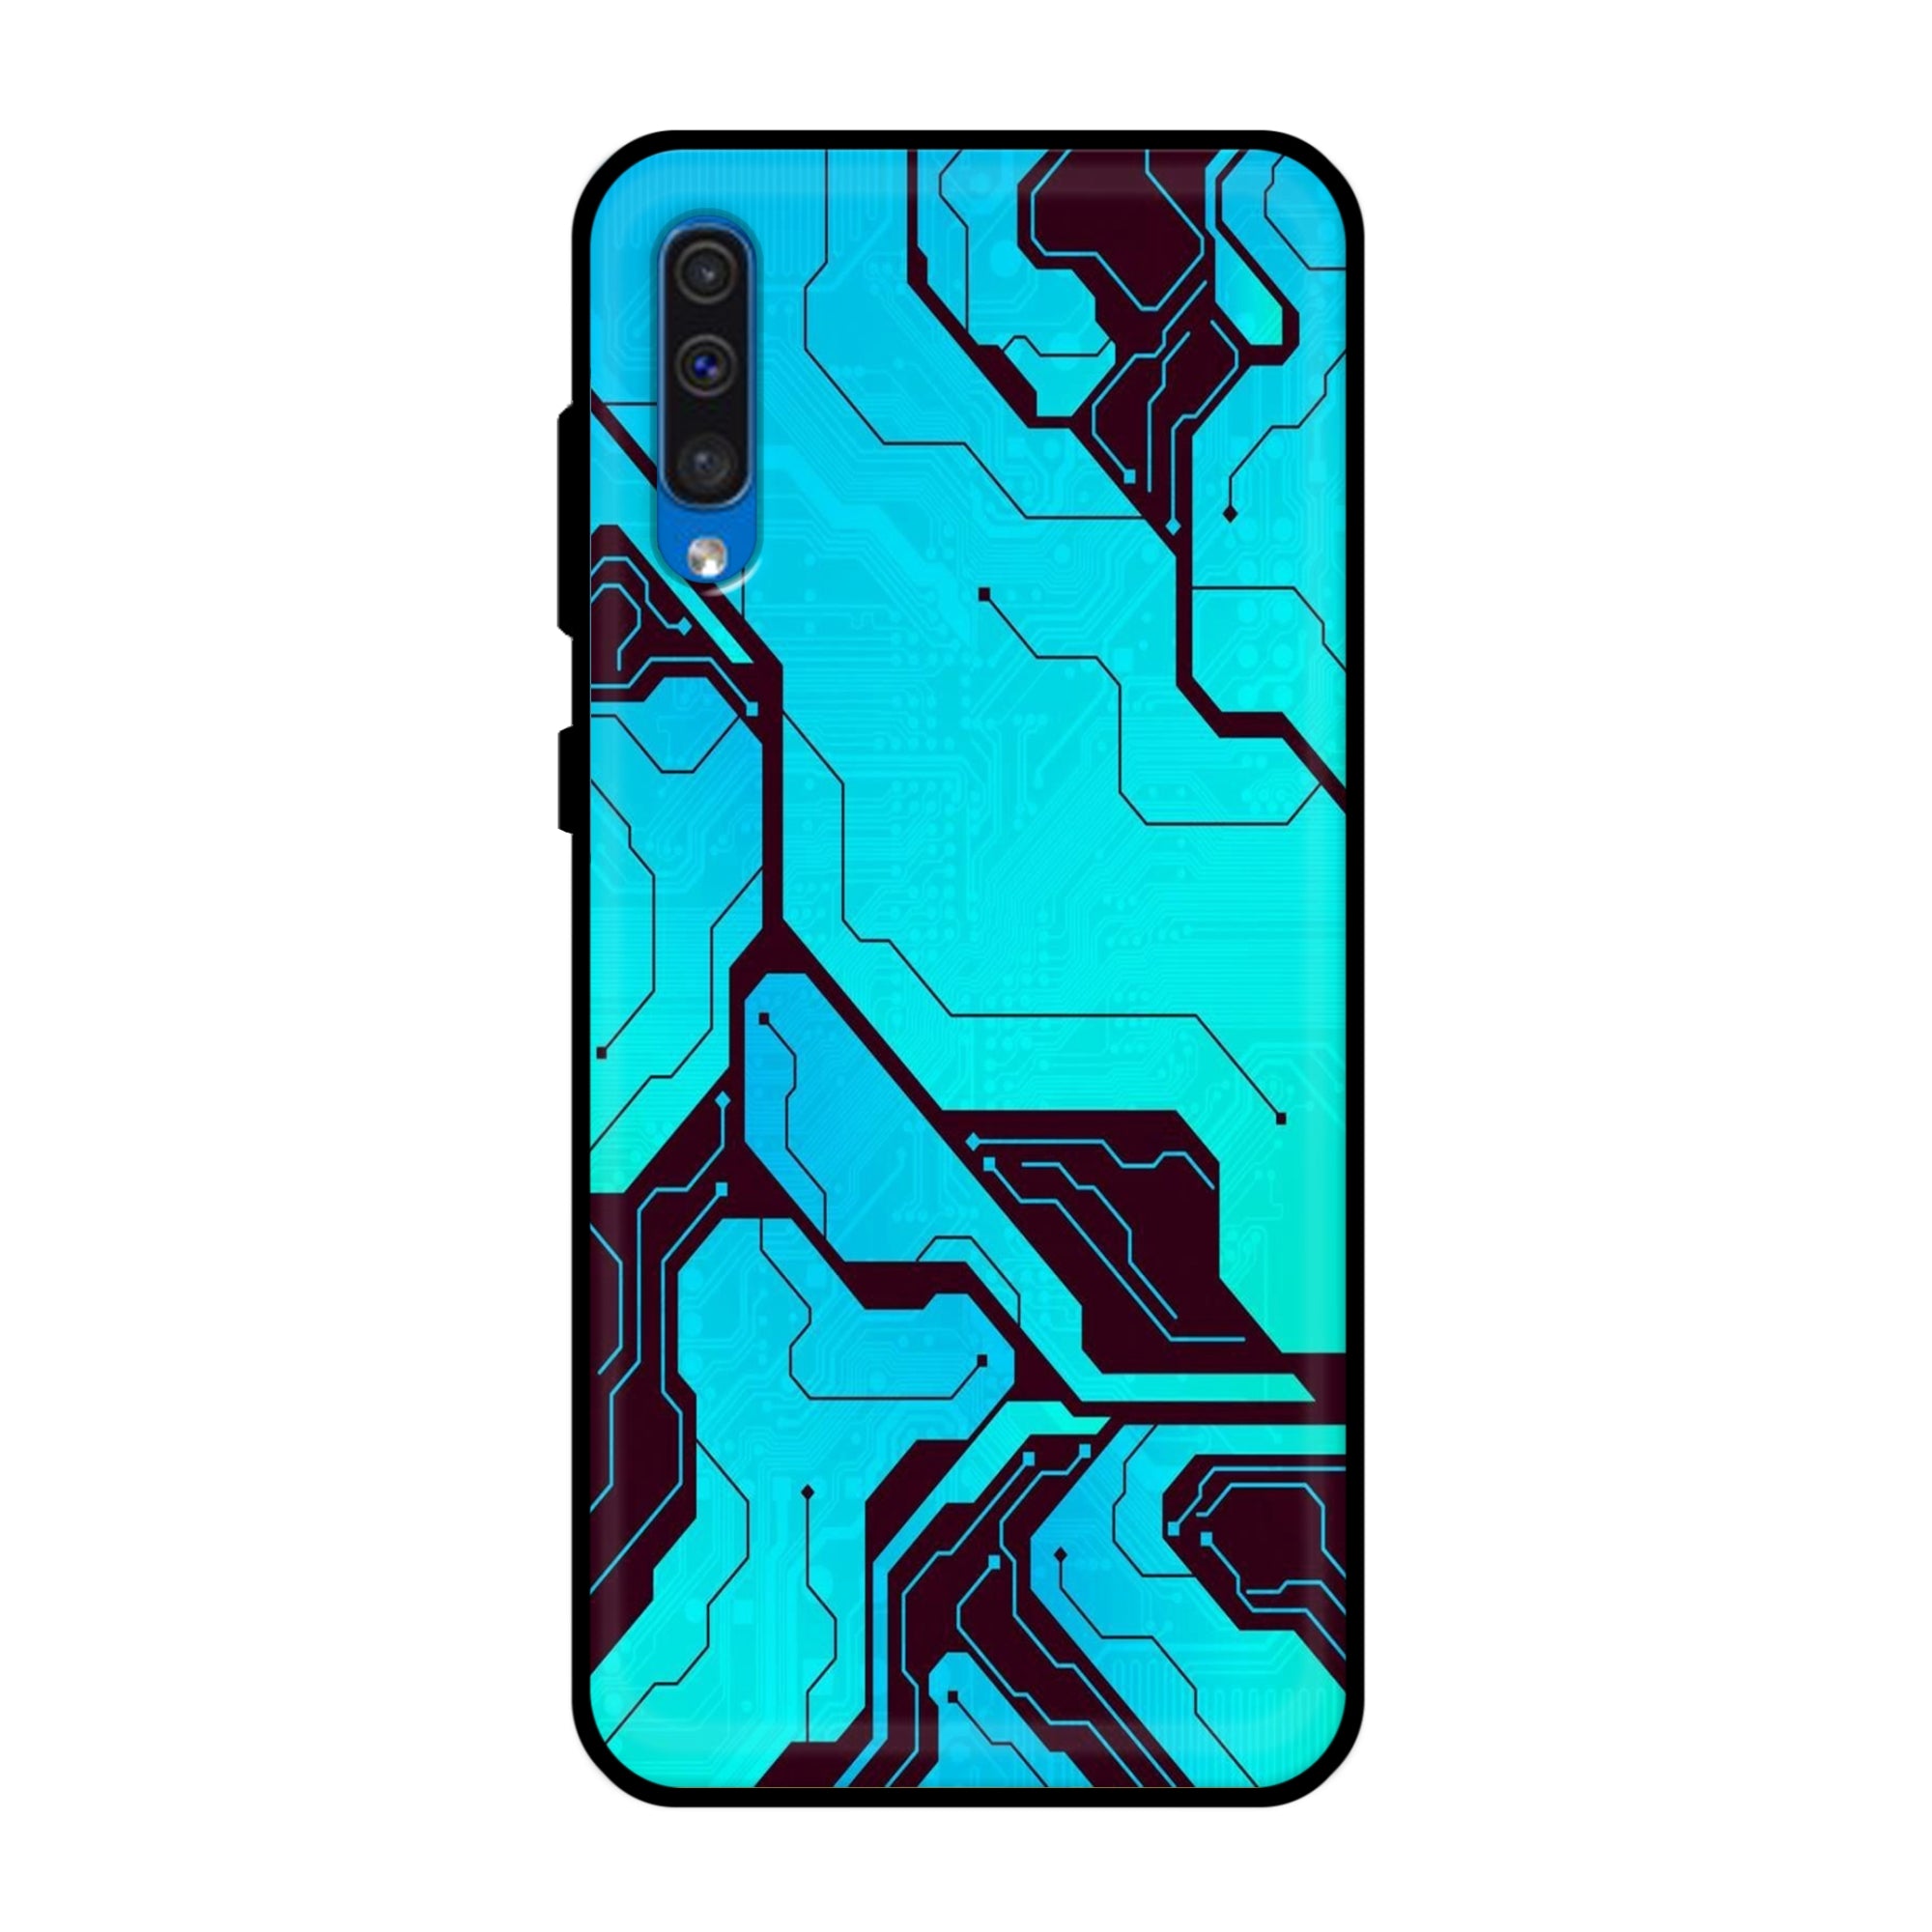 Buy Futuristic Line Metal-Silicon Back Mobile Phone Case/Cover For Samsung Galaxy A50 / A50s / A30s Online